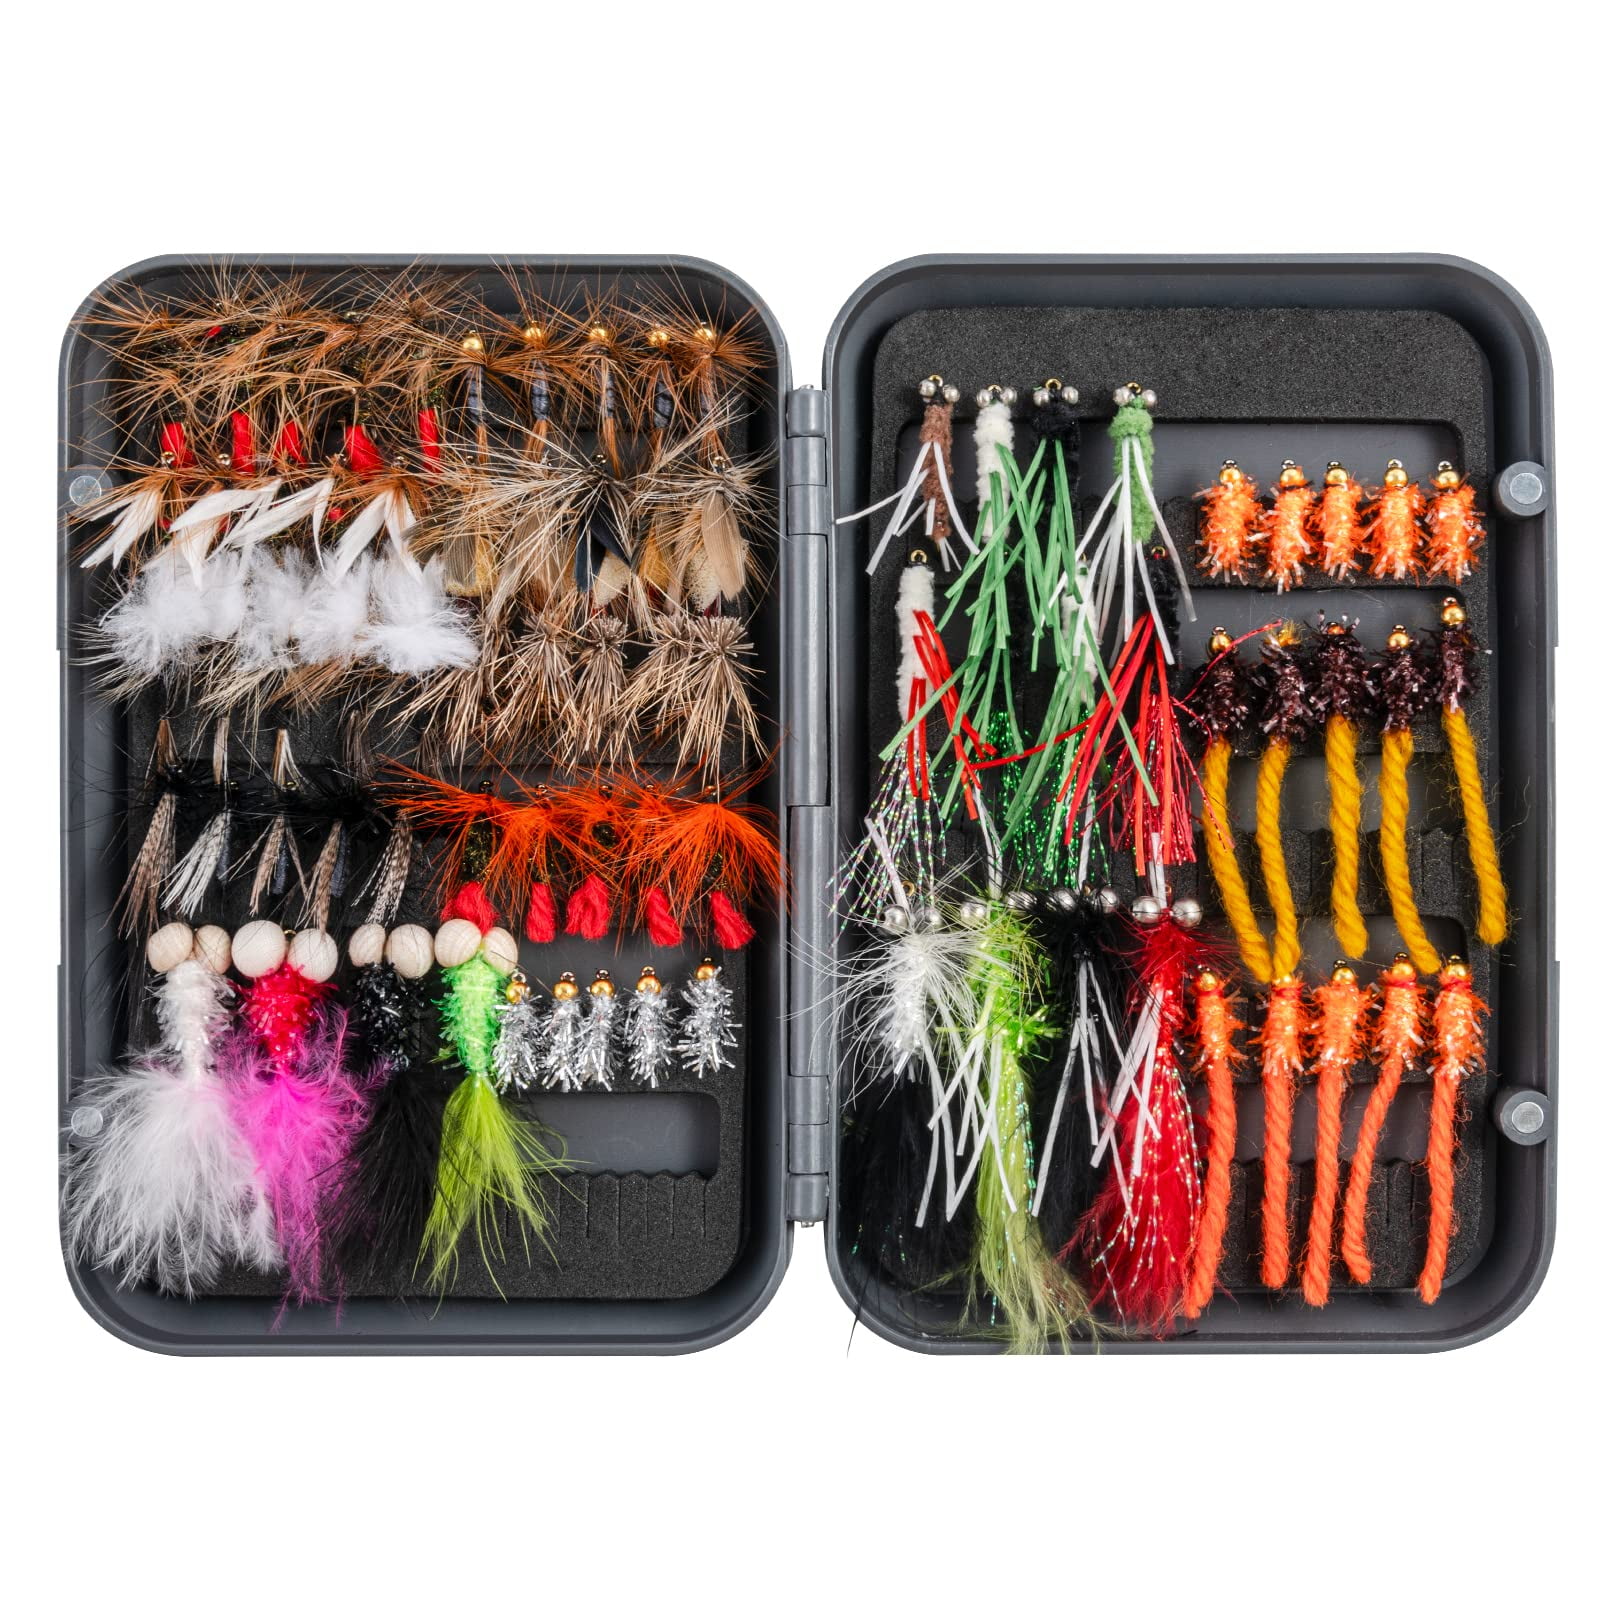 Sougayilang Fly Flies Lures Deutsch Kit Portable Tackle Box For Bass, Trout,  Freshwater And Saltwater Fishing From Wai05, $11.12